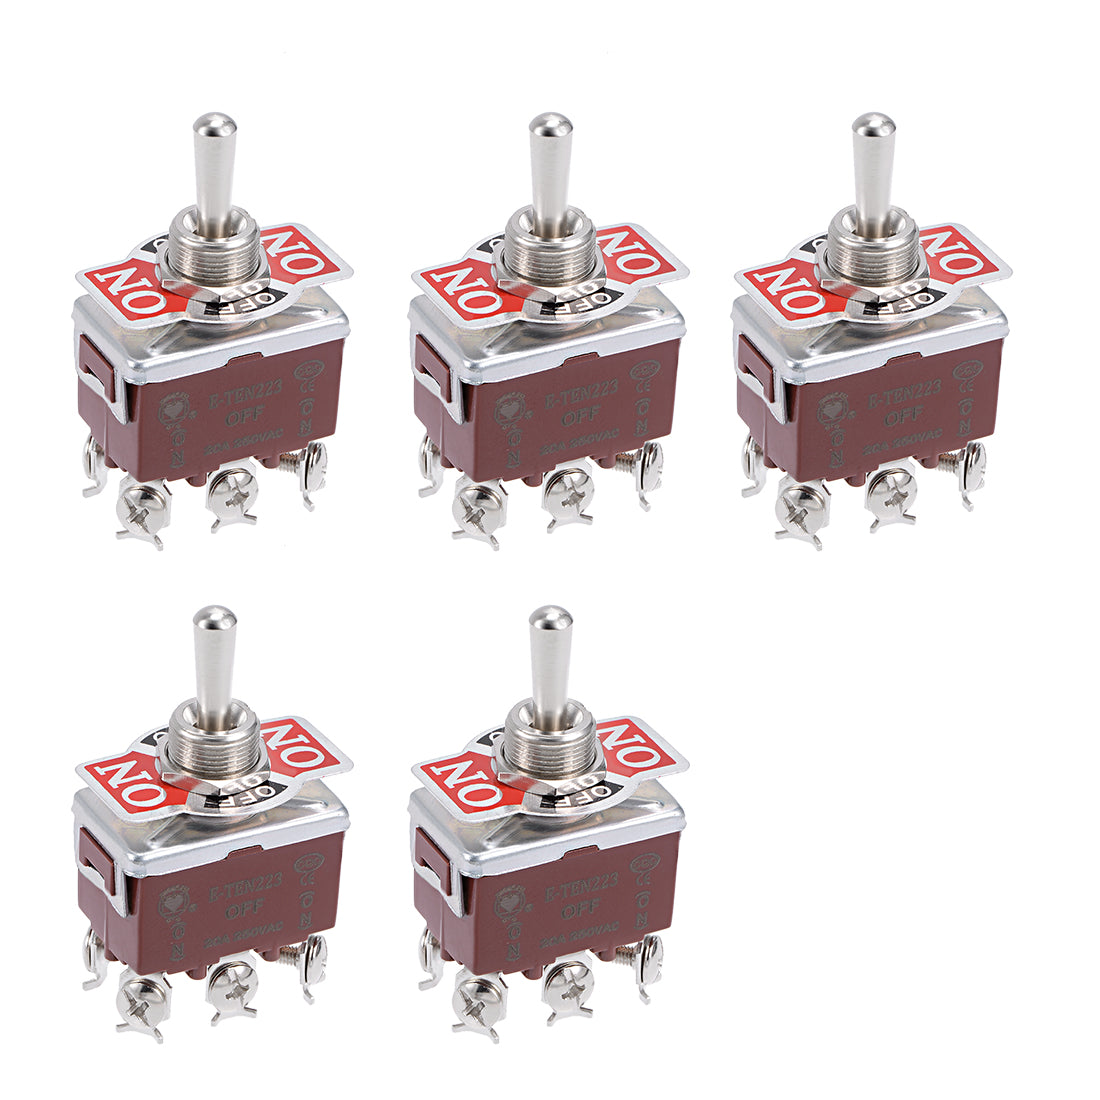 uxcell Uxcell DPDT Momentary Rocker Toggle Switch Heavy-Duty 20A 250V 6P ON/OFF/ON Metal Bat 5pcs